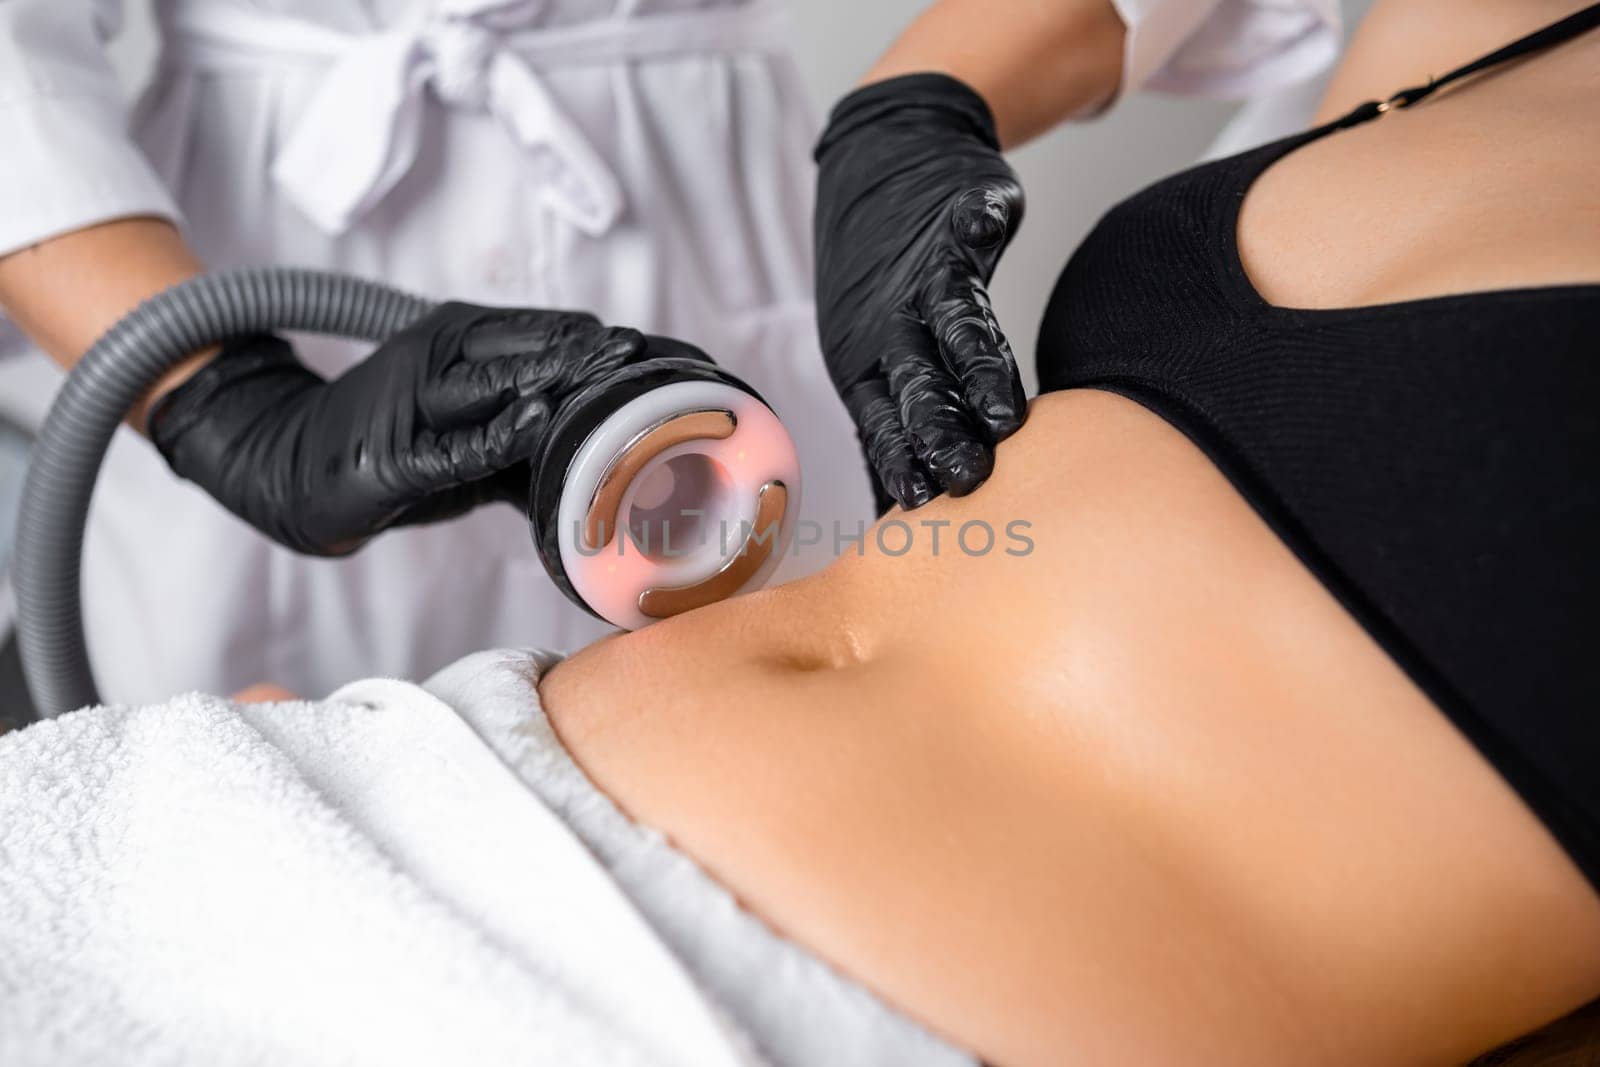 A cosmetologist utilizes an ultrasound device during a lifting procedure on a woman's abdomen. by vladimka